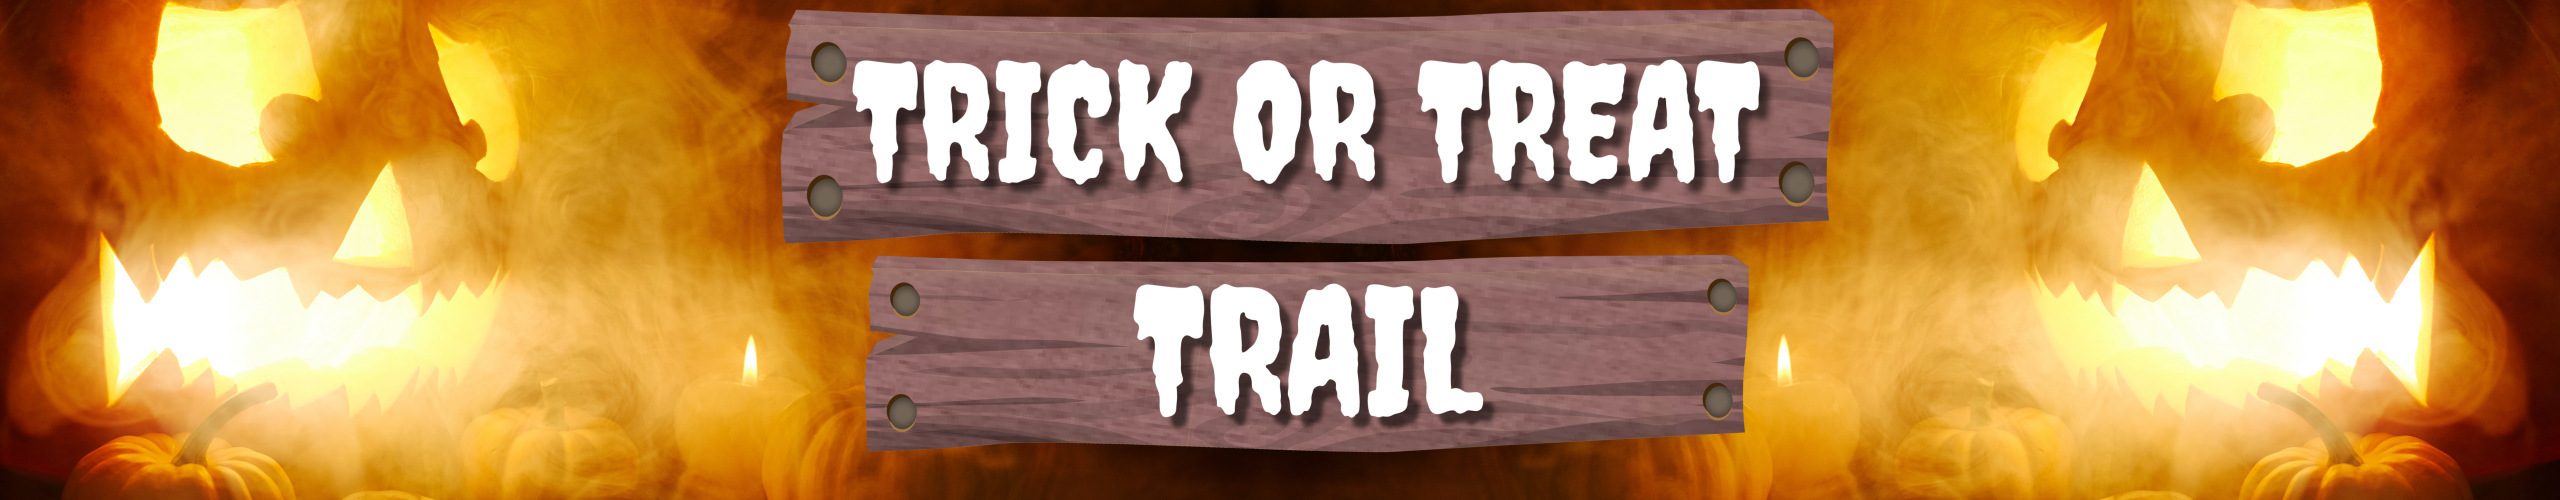 Trick or Treat Trail Banner Ticket Sale